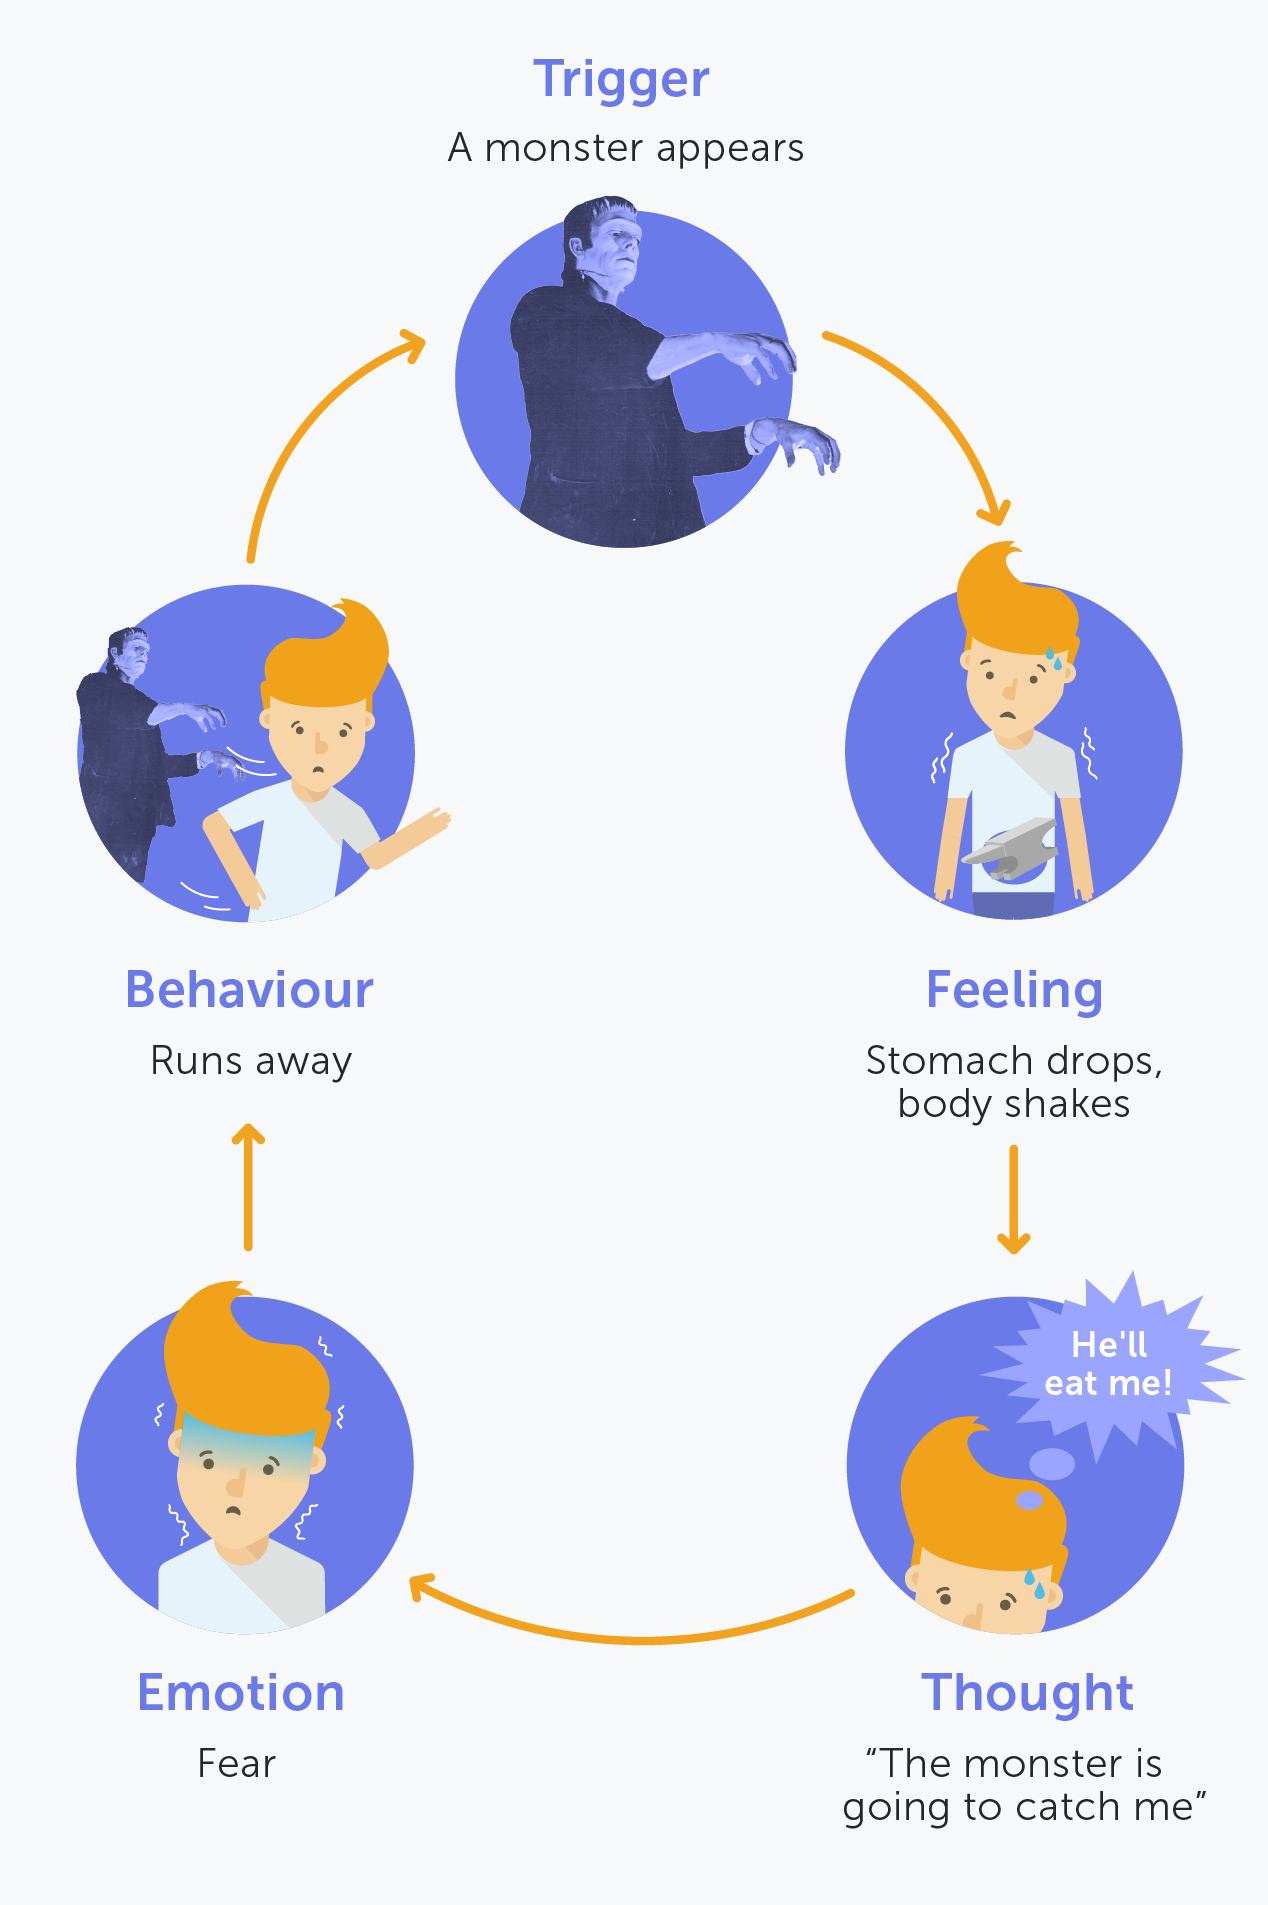 Diagram showing trigger feeling thought emotion and behaviour in a loop